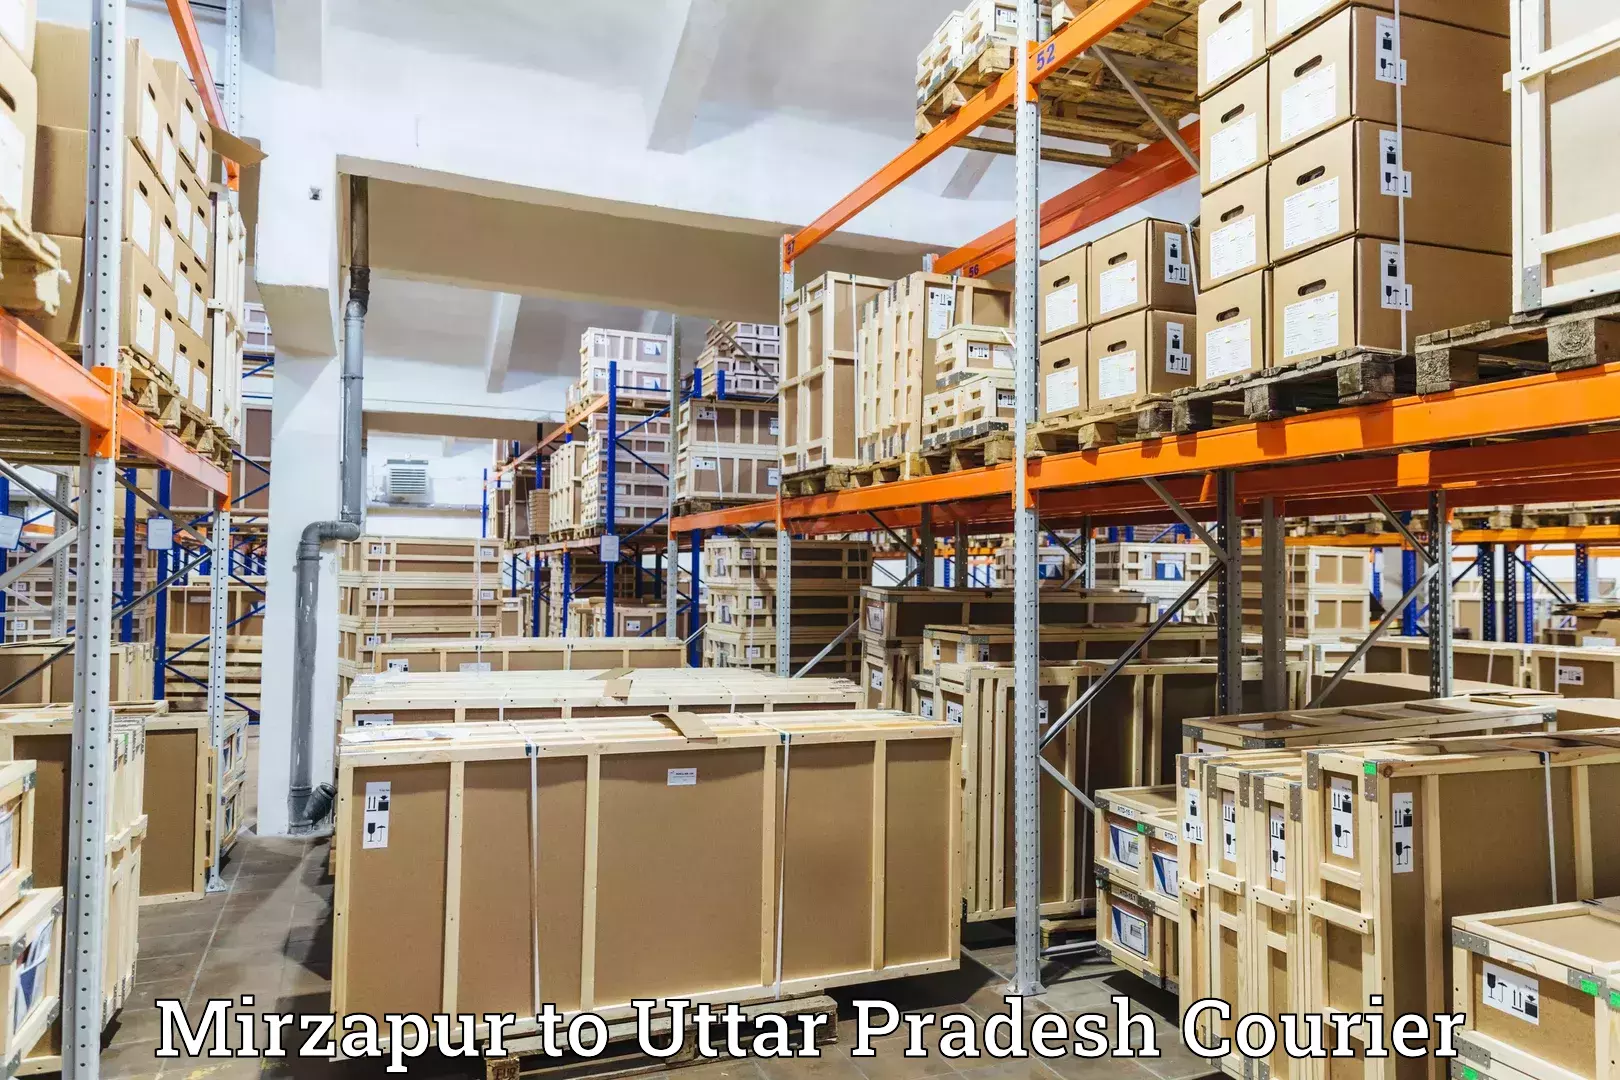 Modern courier technology Mirzapur to Aligarh